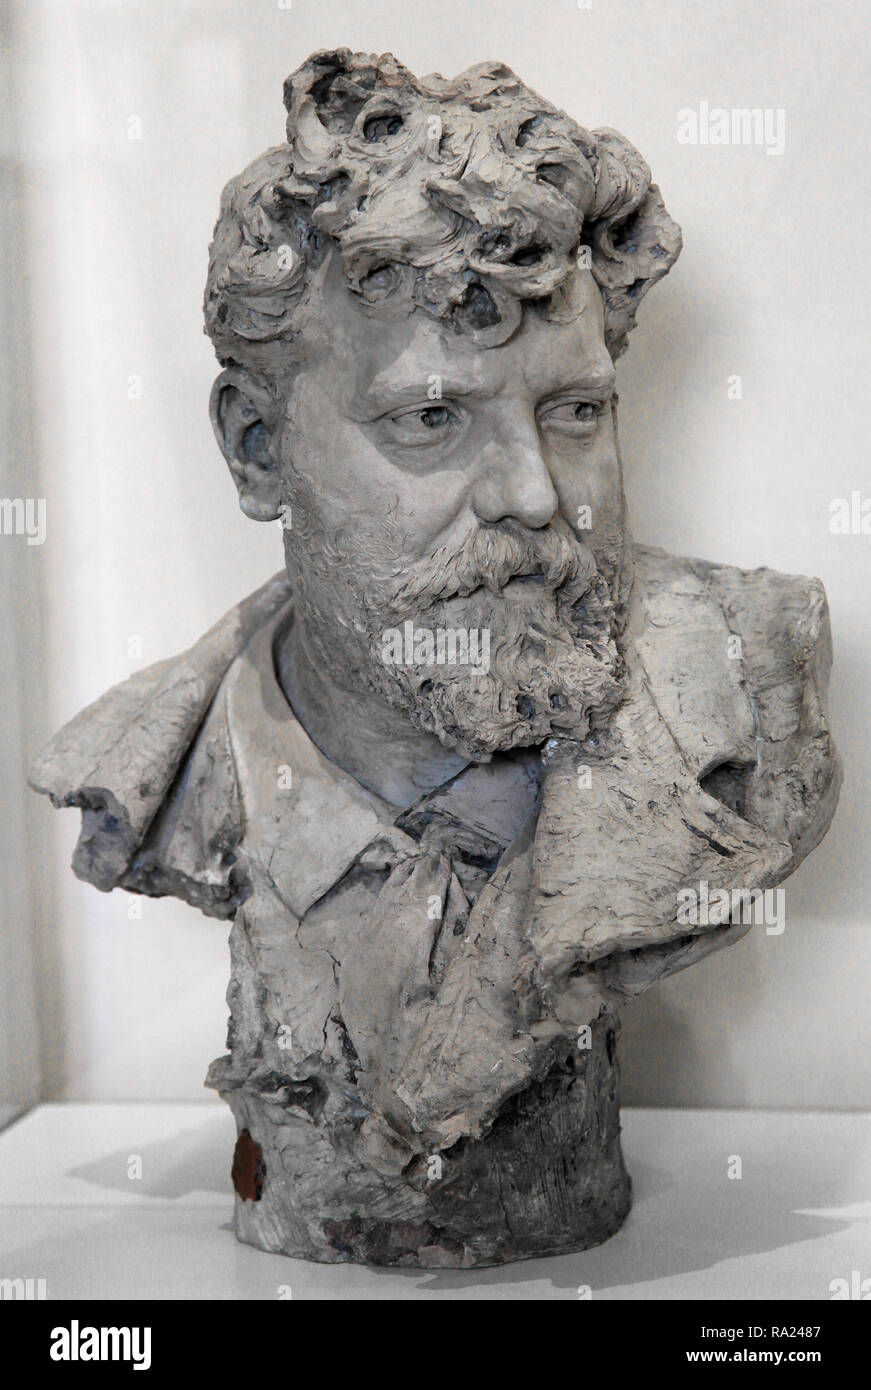 Sculpture of Francisco Domingo Marques 1885 by the artist Mariano Benlliure Gil 1862-1947 Stock Photo